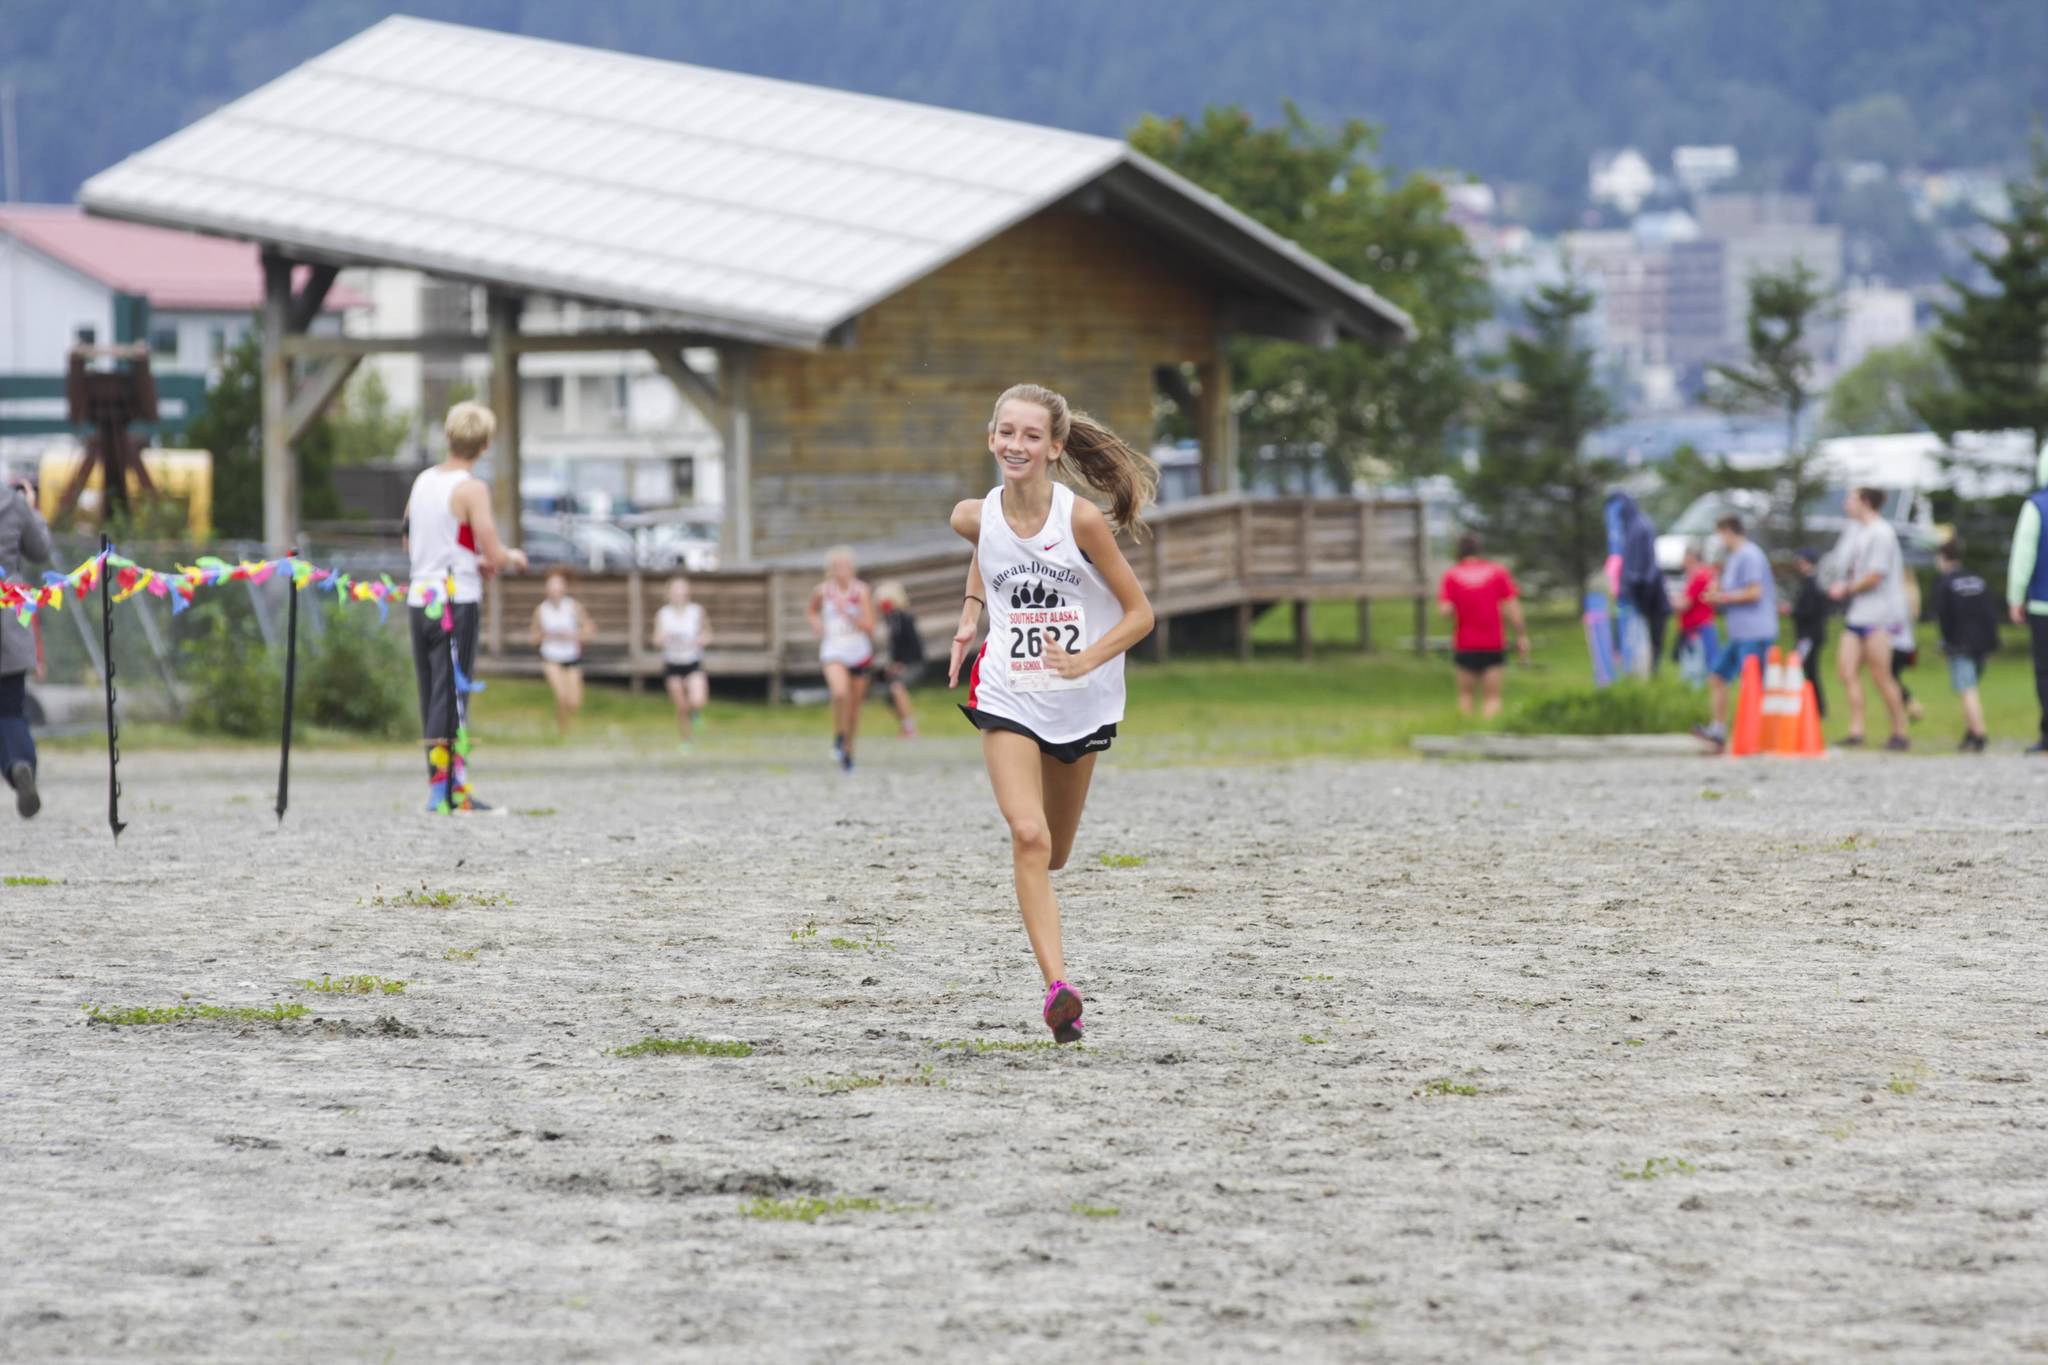 Rayna Tuckwood, Juneau-Douglas High School: Yadaa.at Kalé sophomore, sprints to the finish during a cross country race at Savikko Park on Saturday, Aug. 21, 2021. Tuckwood would place first with a time of 20:20 as the JDHS girls took the first five places. (Michael S. Lockett / Juneau Empire)